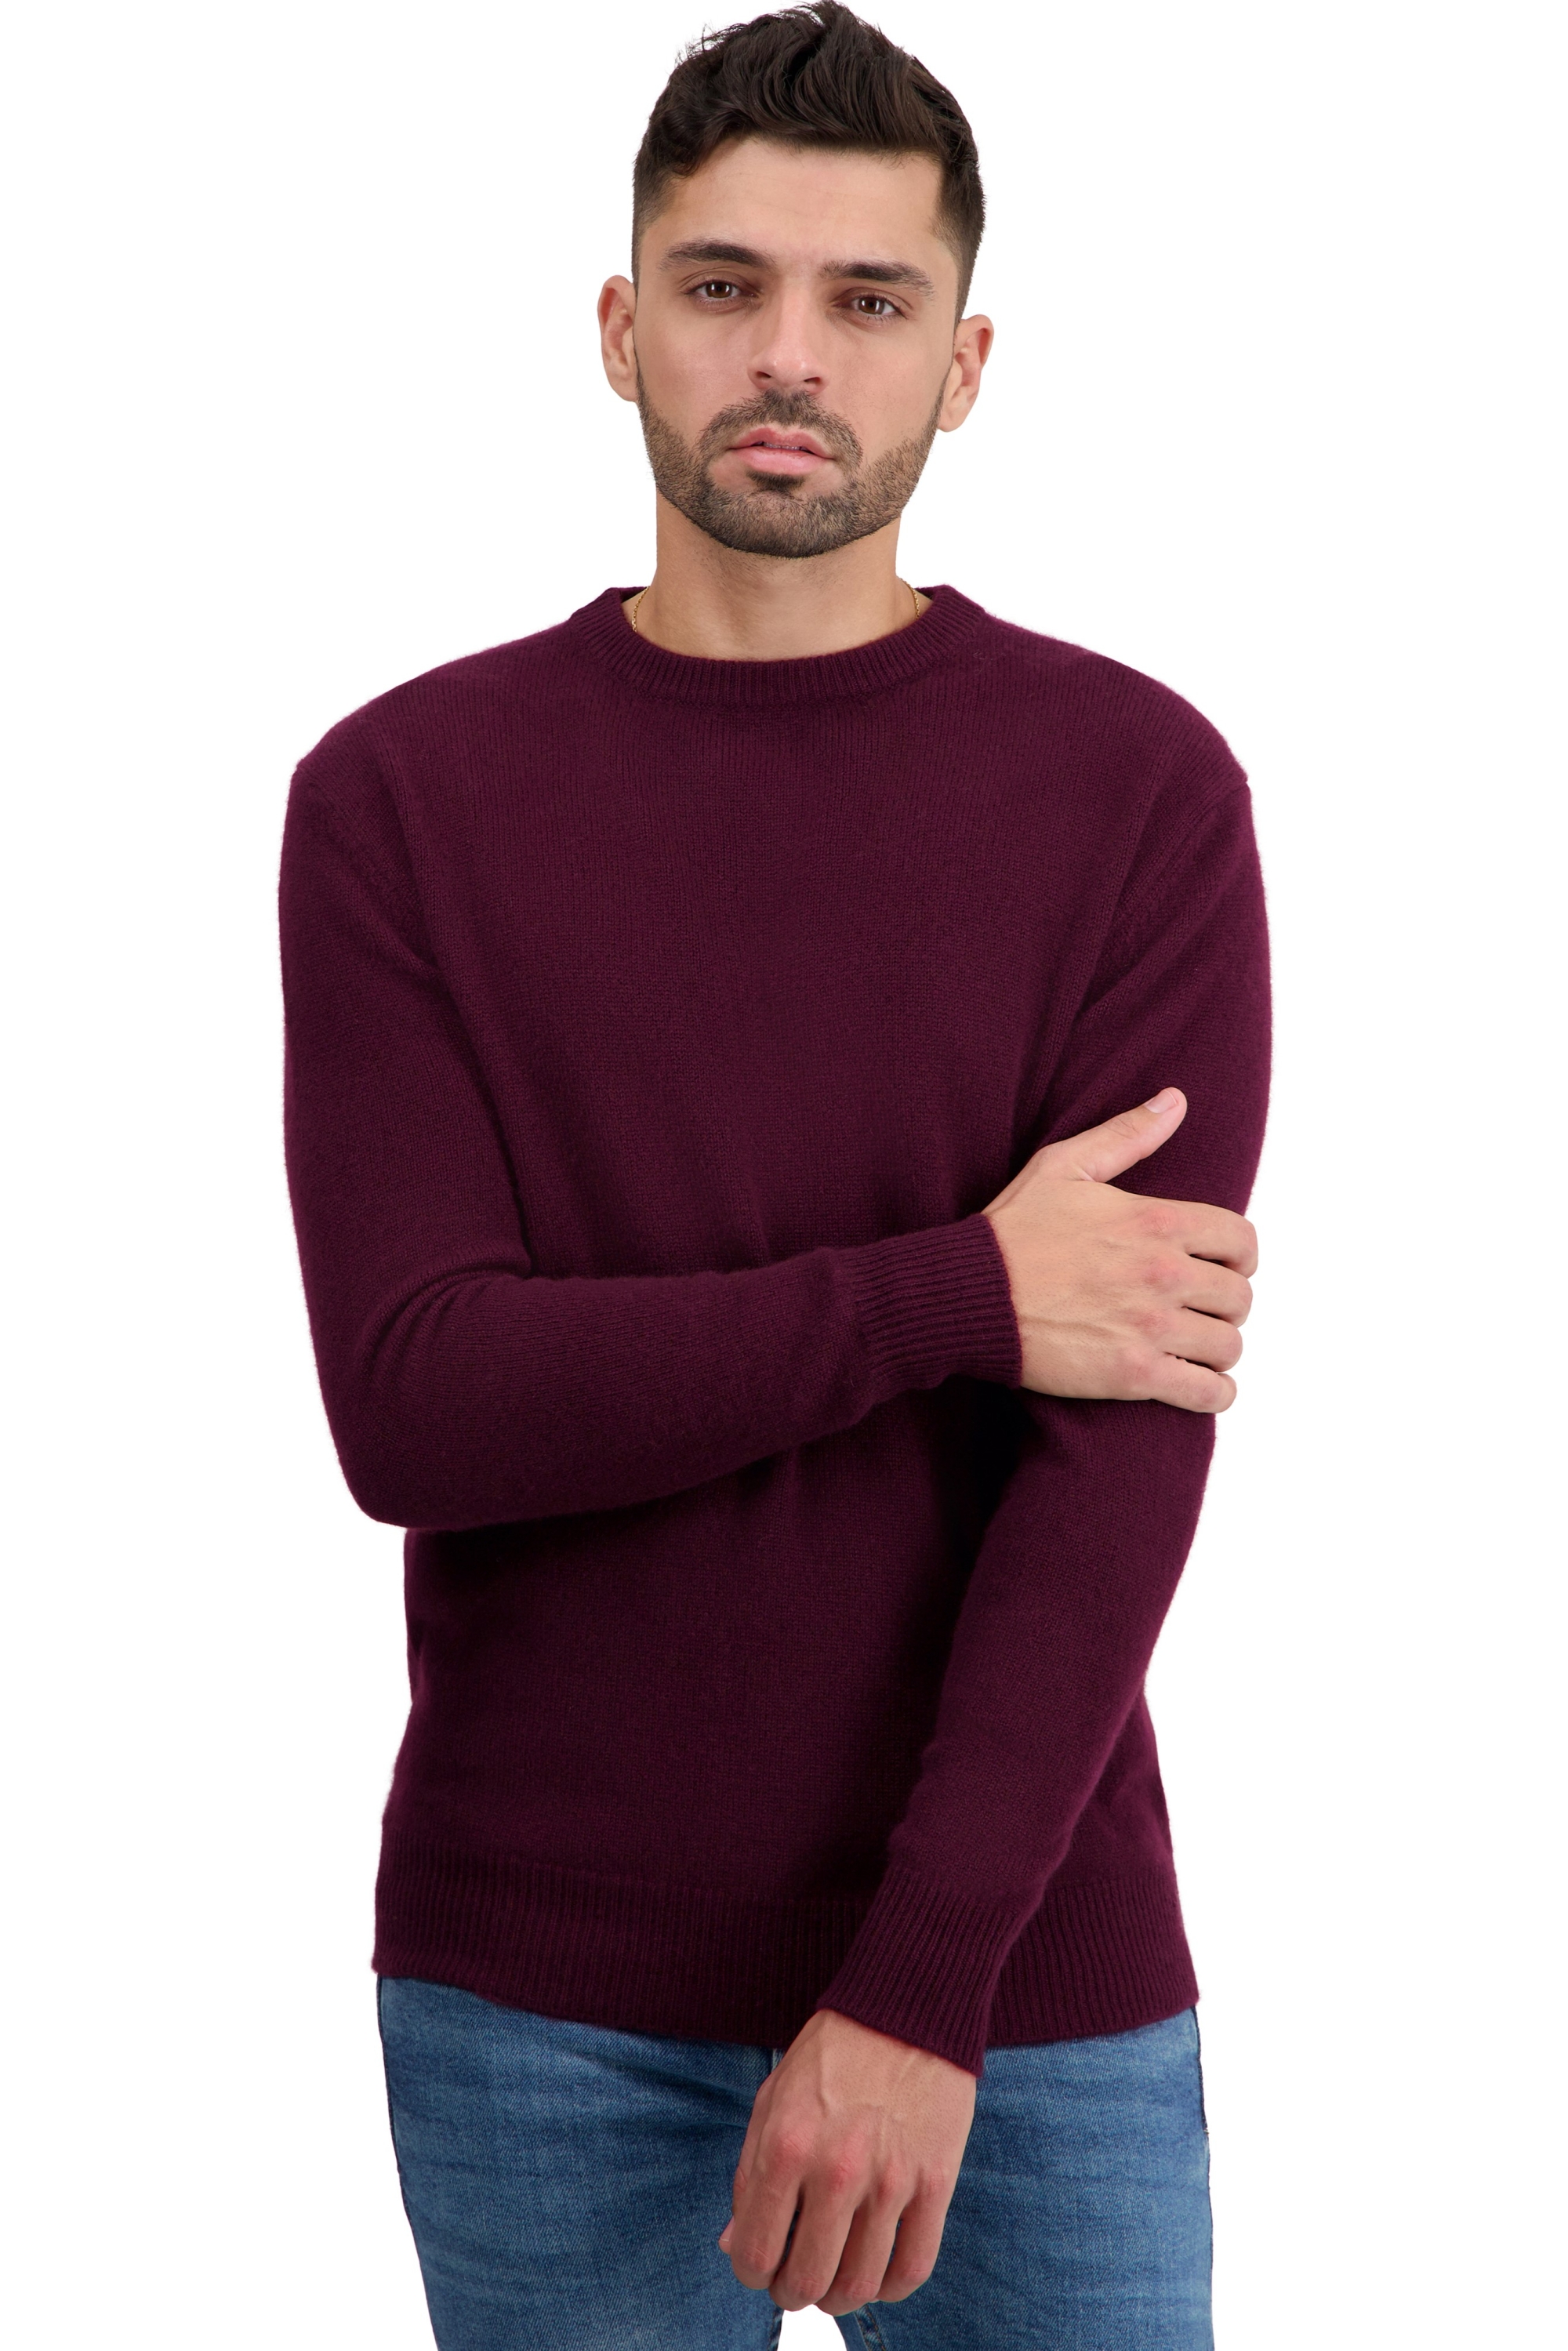 Cashmere men chunky sweater touraine first bordeaux xl